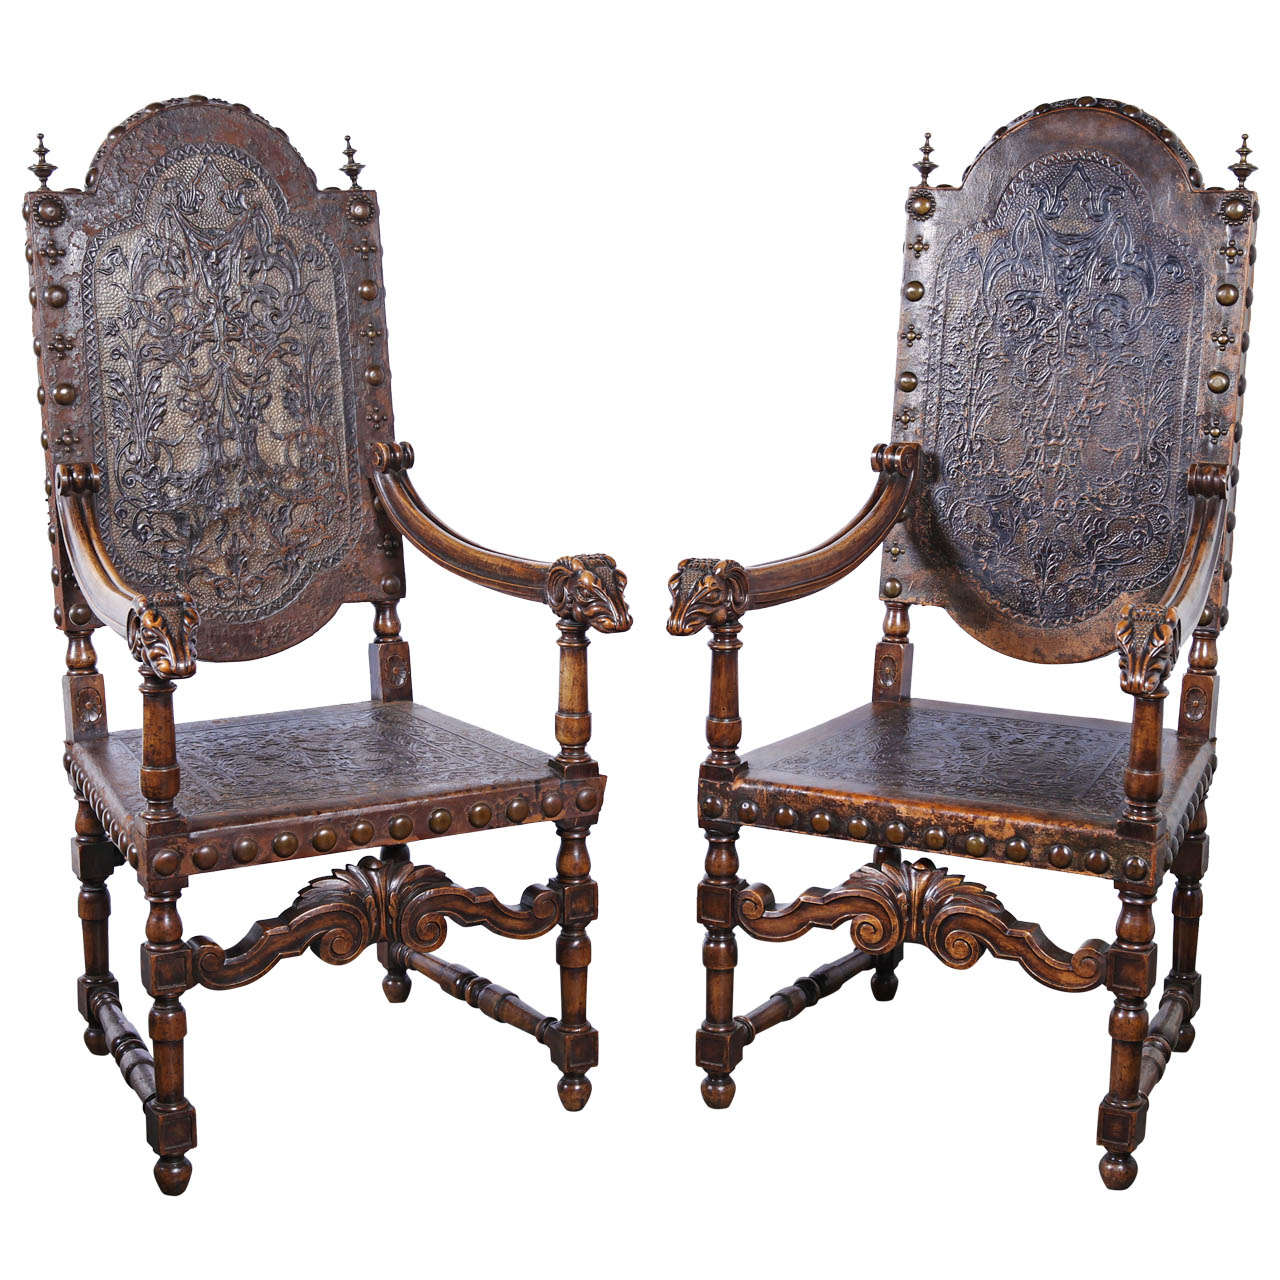 Pair of 19th Century Portuguese Leather Arm Chairs